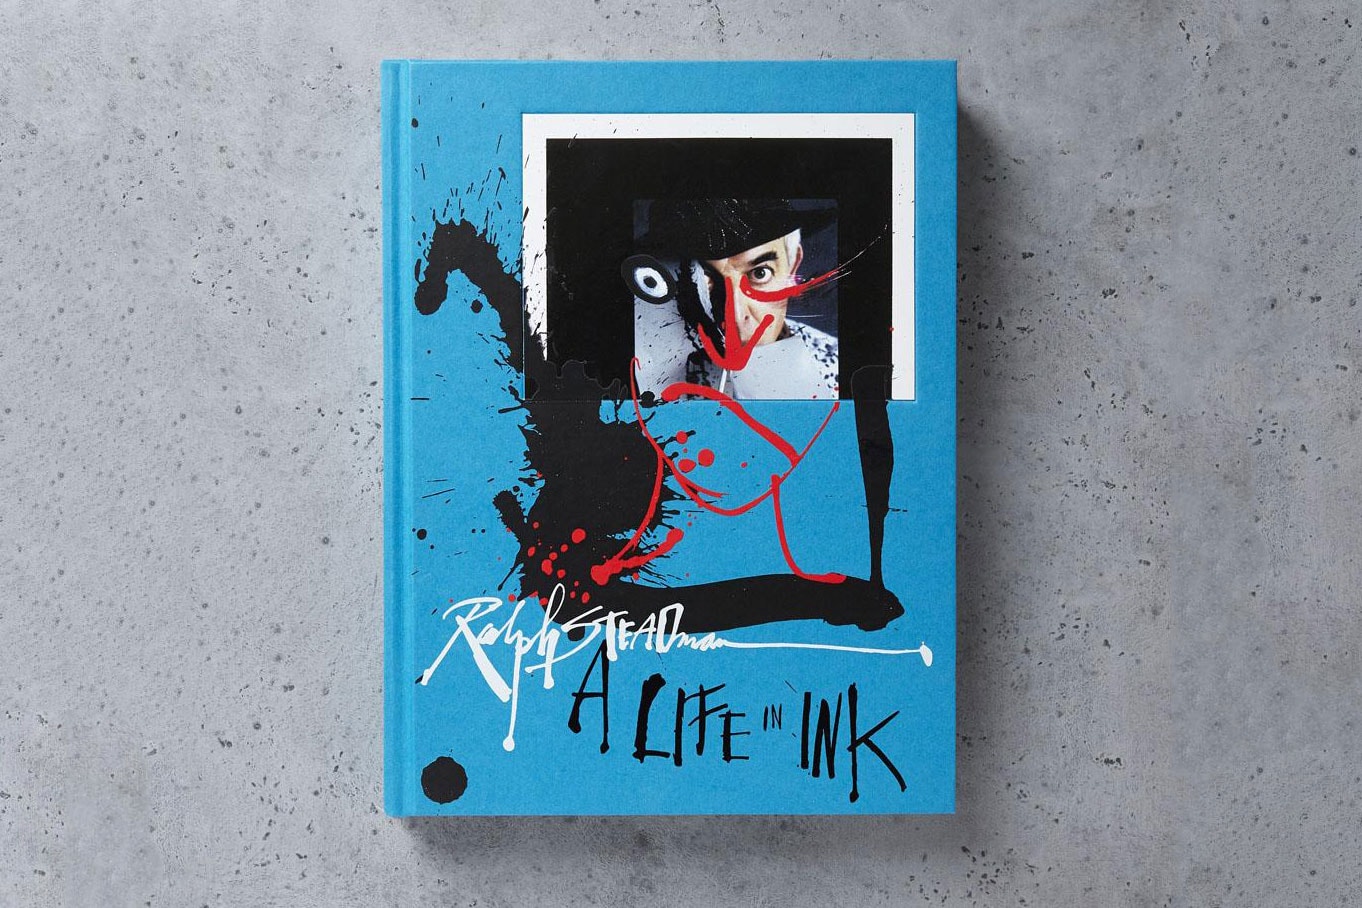 ralph steadman a life in ink chronicle books release artworks drawings illustrations